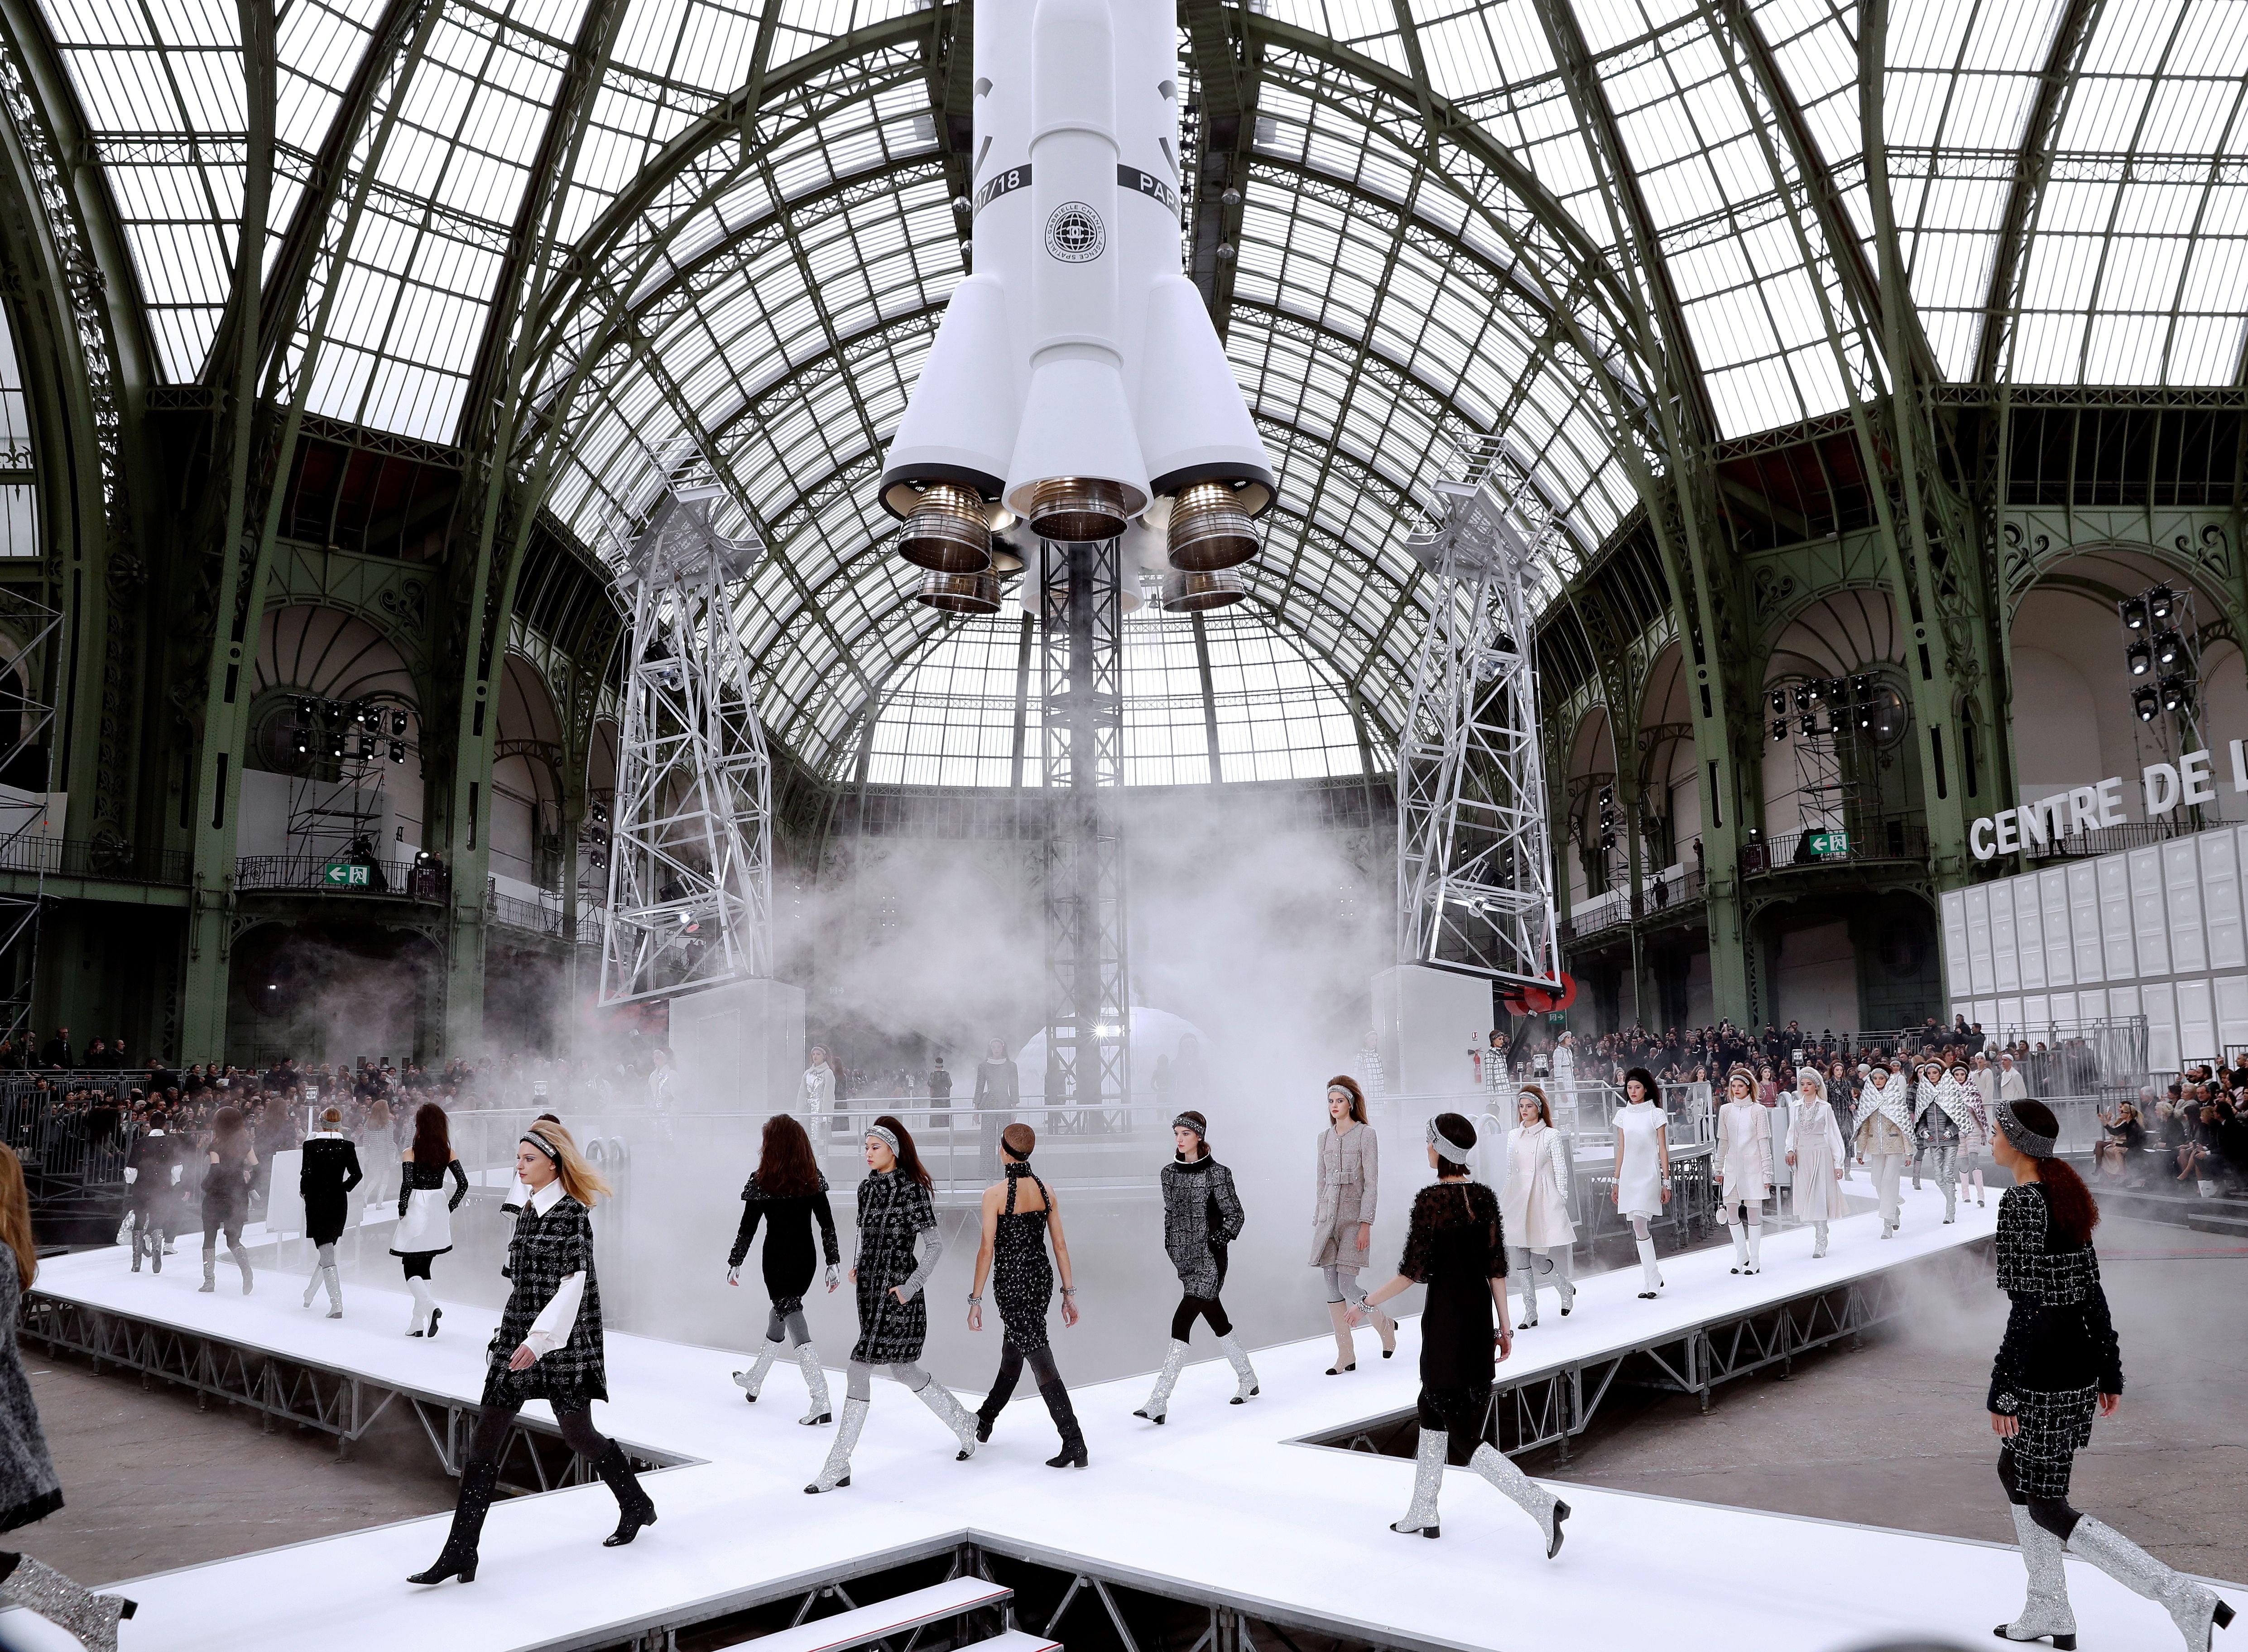 Karl Lagerfeld's most impressive fashion shows for Chanel